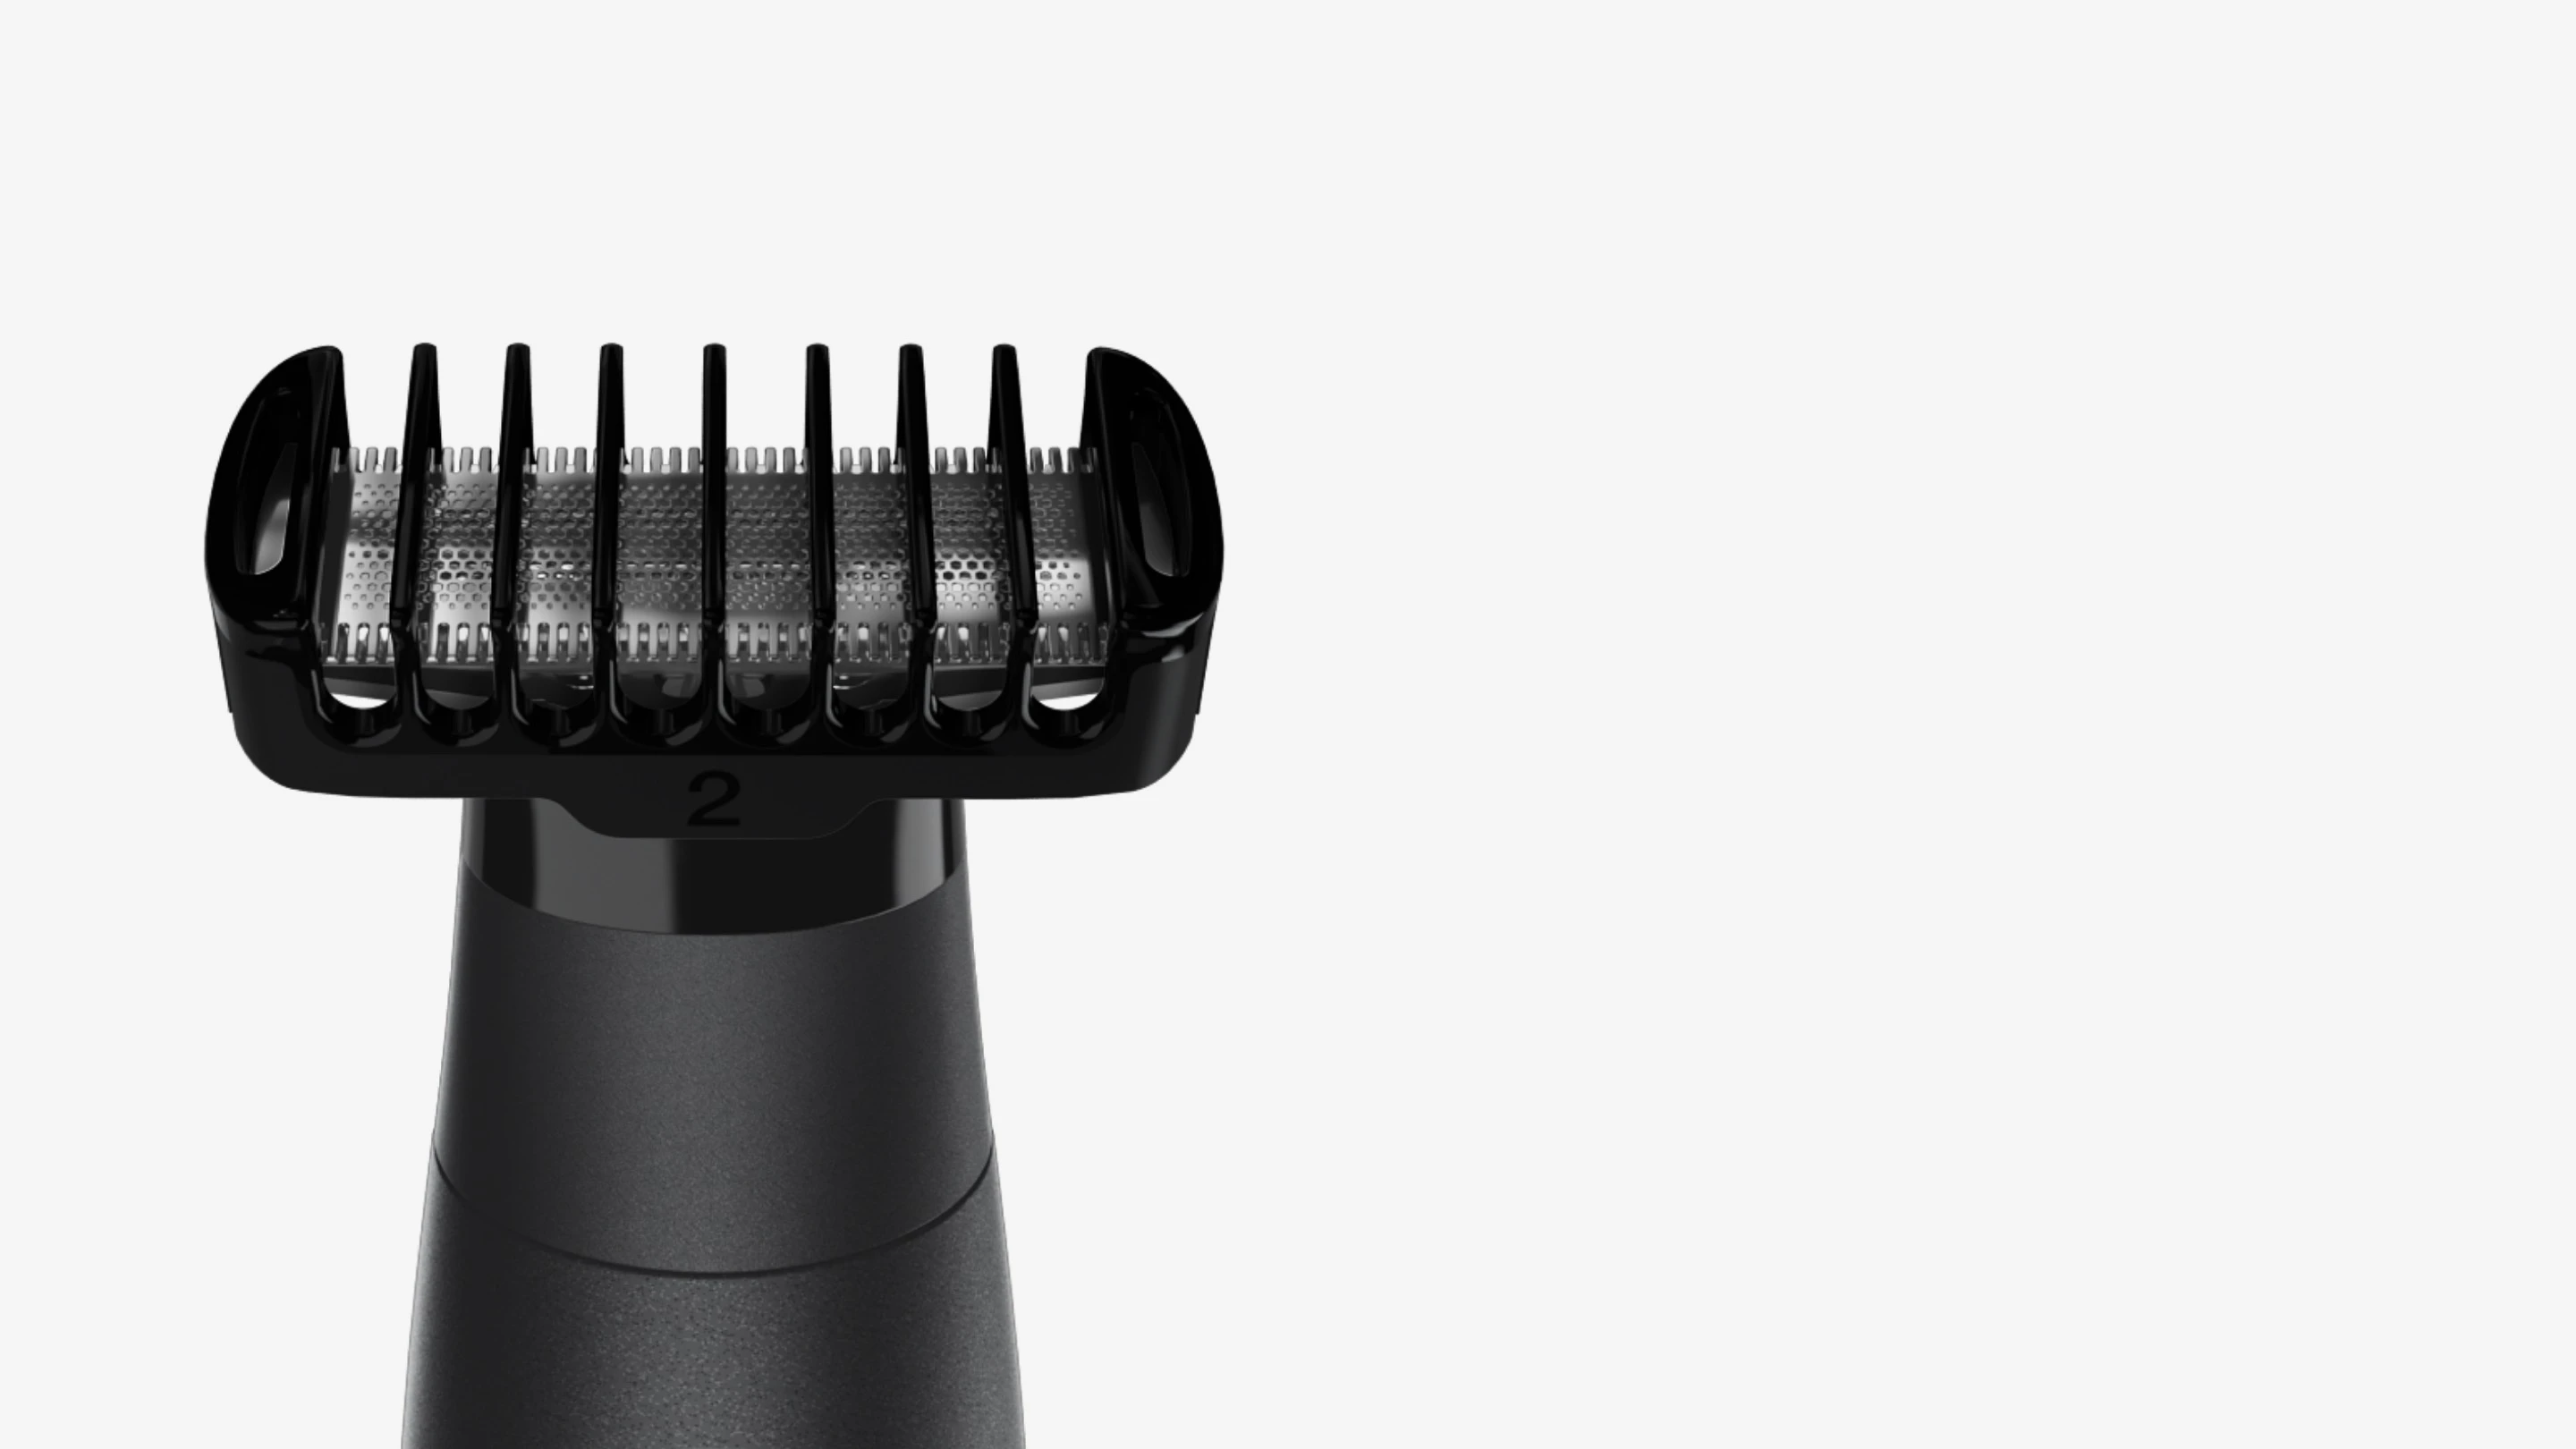 Trim your way. 2-way combs to trim in any direction.